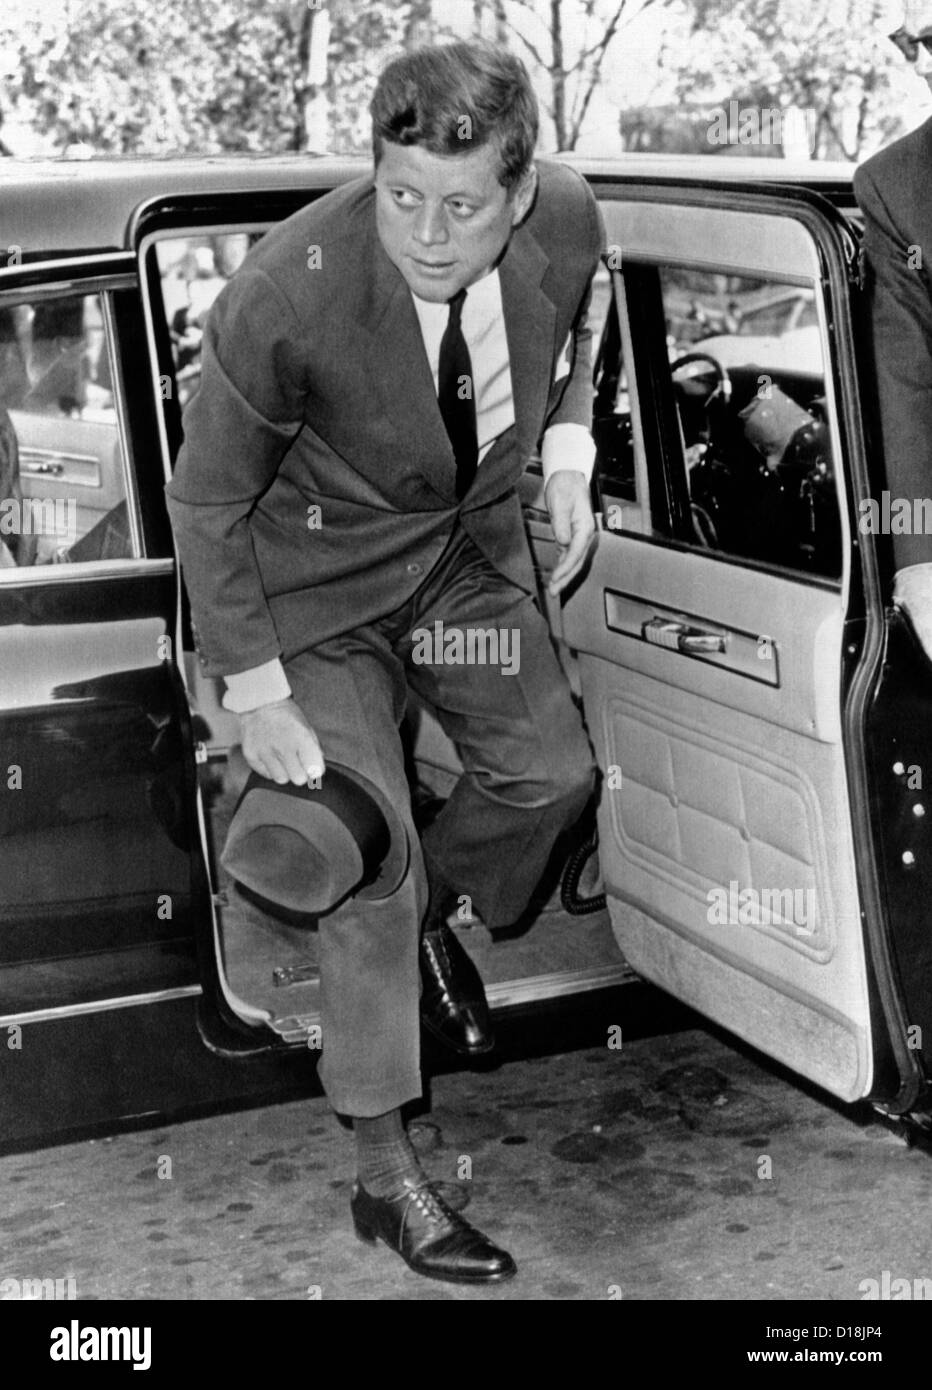 President John Kennedy steps from his limousine during the Cuban Missile Crisis. He was attending mass at St. Stephens church. Stock Photo